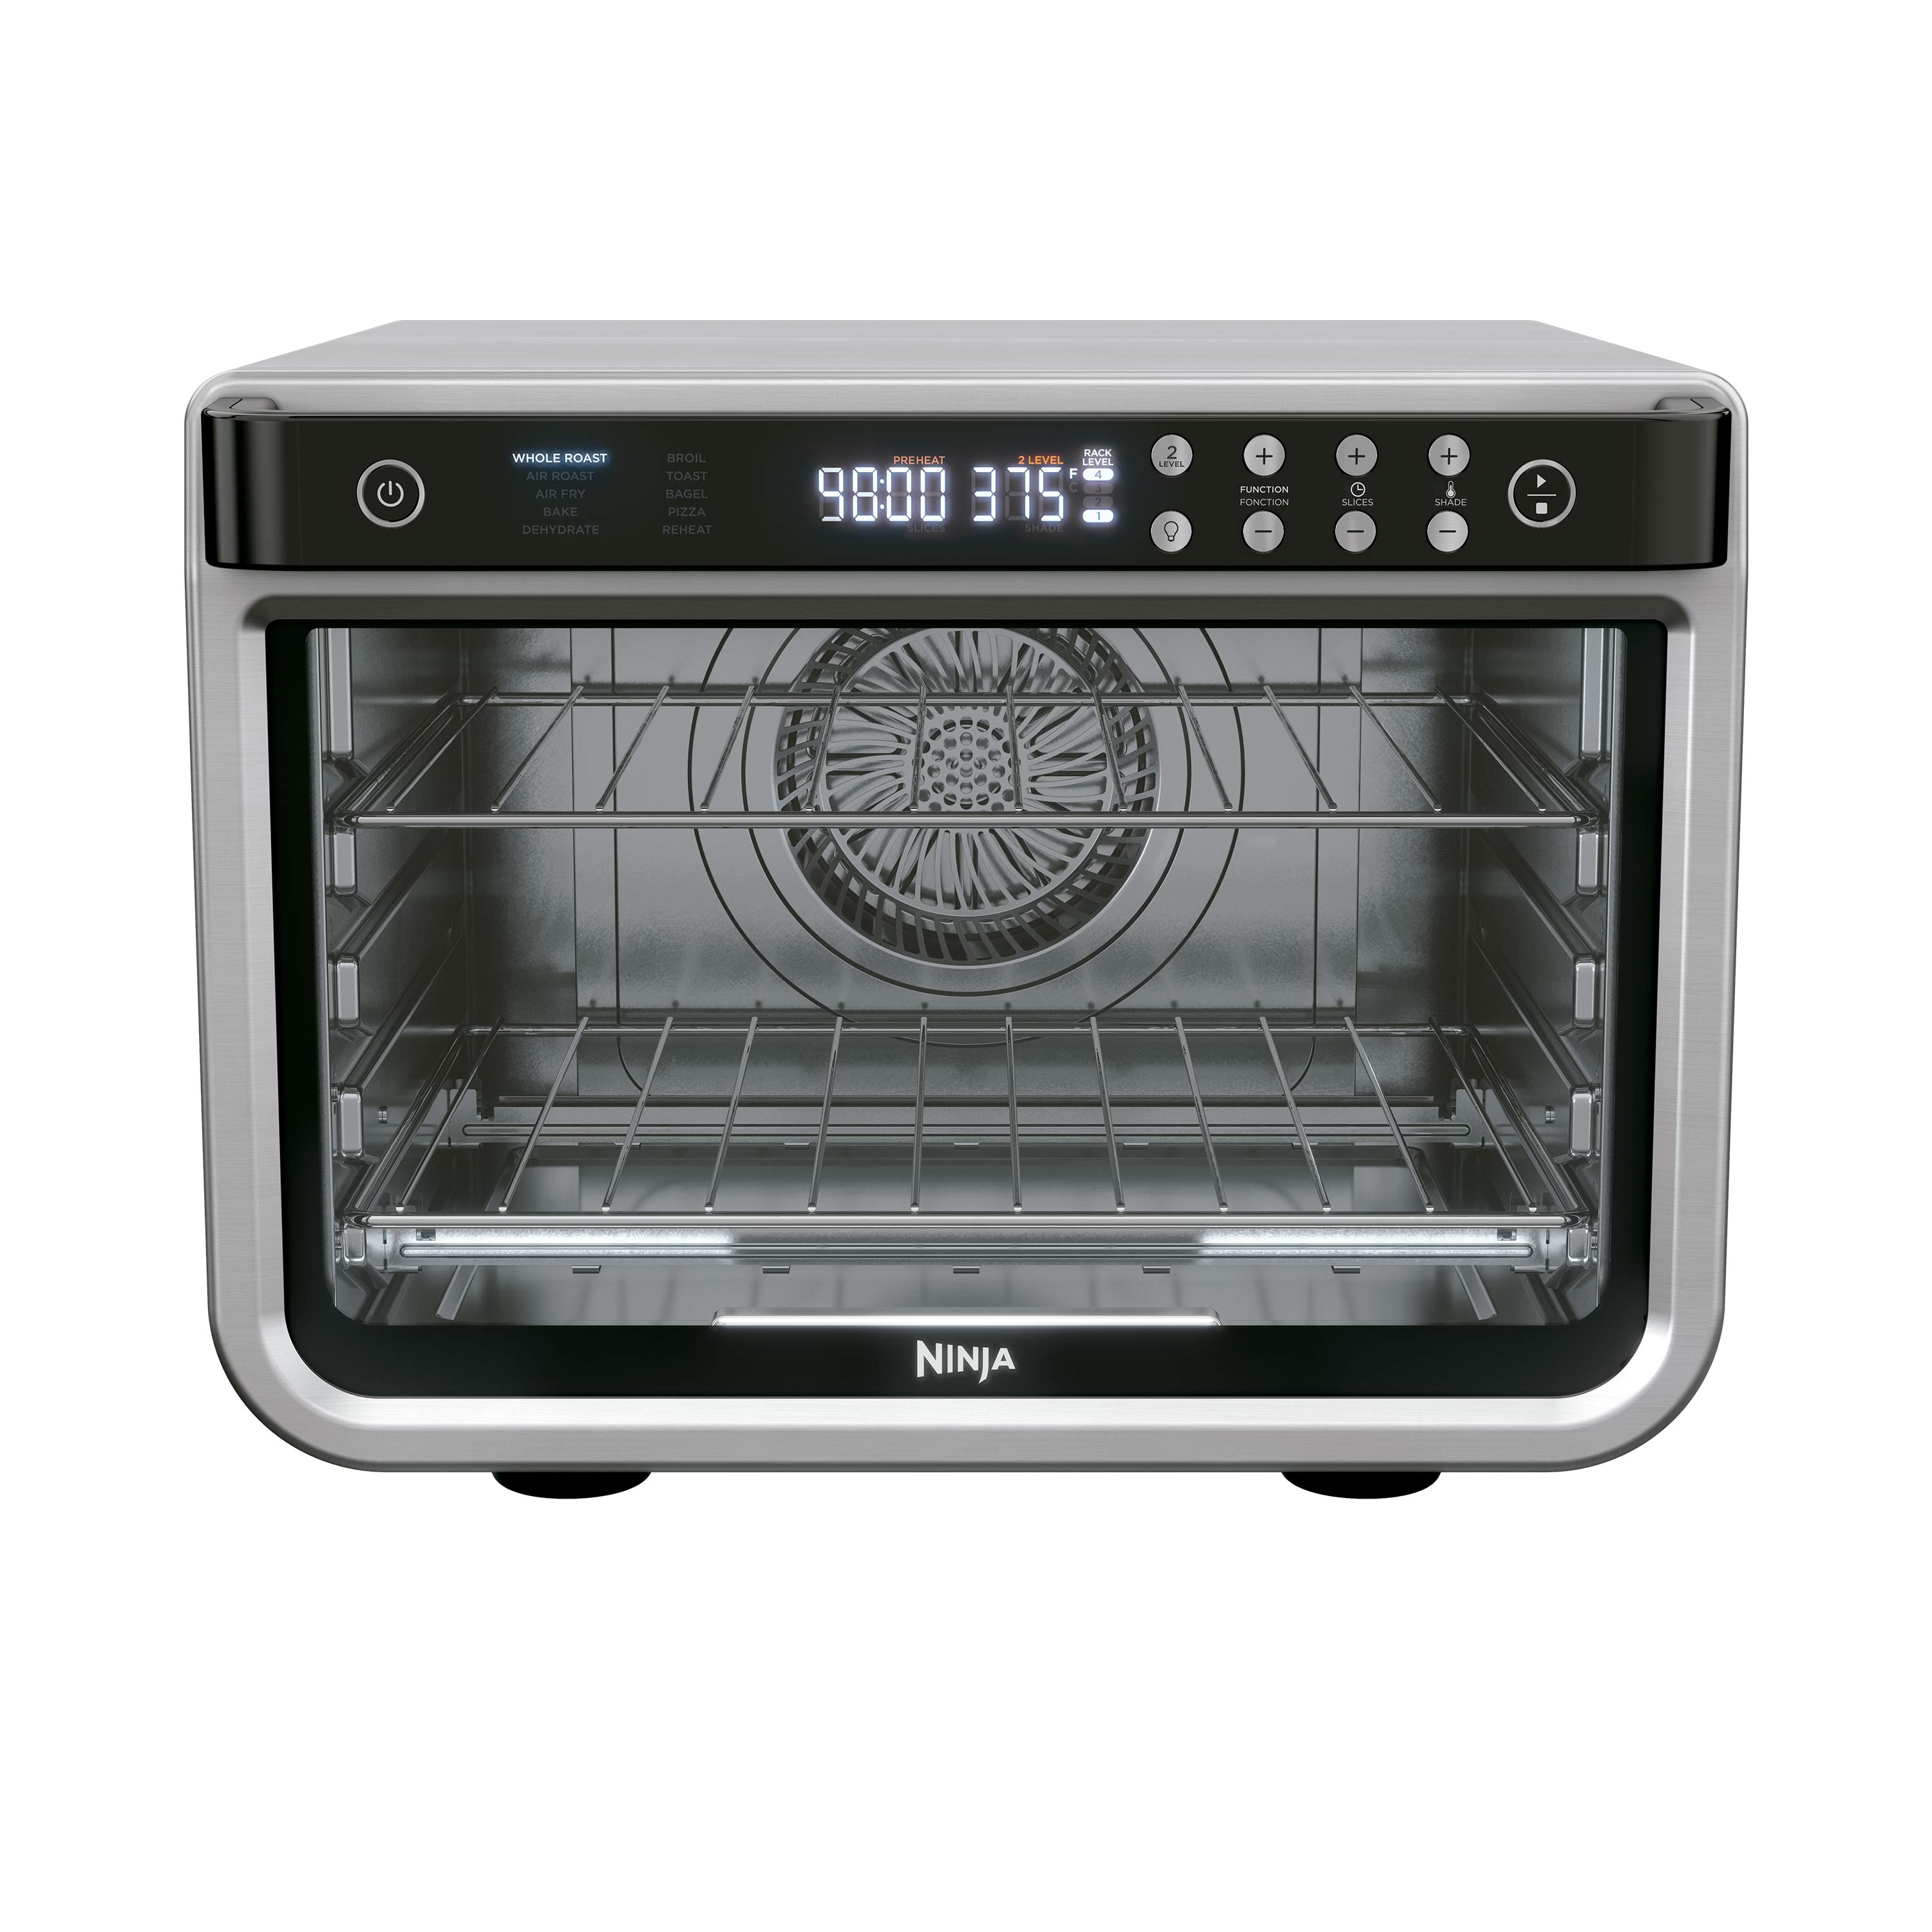 Ninja Foodi 8-in-1 XL Pro Air Fry Oven, Large Countertop Convection Oven, DT200 - image 1 of 12